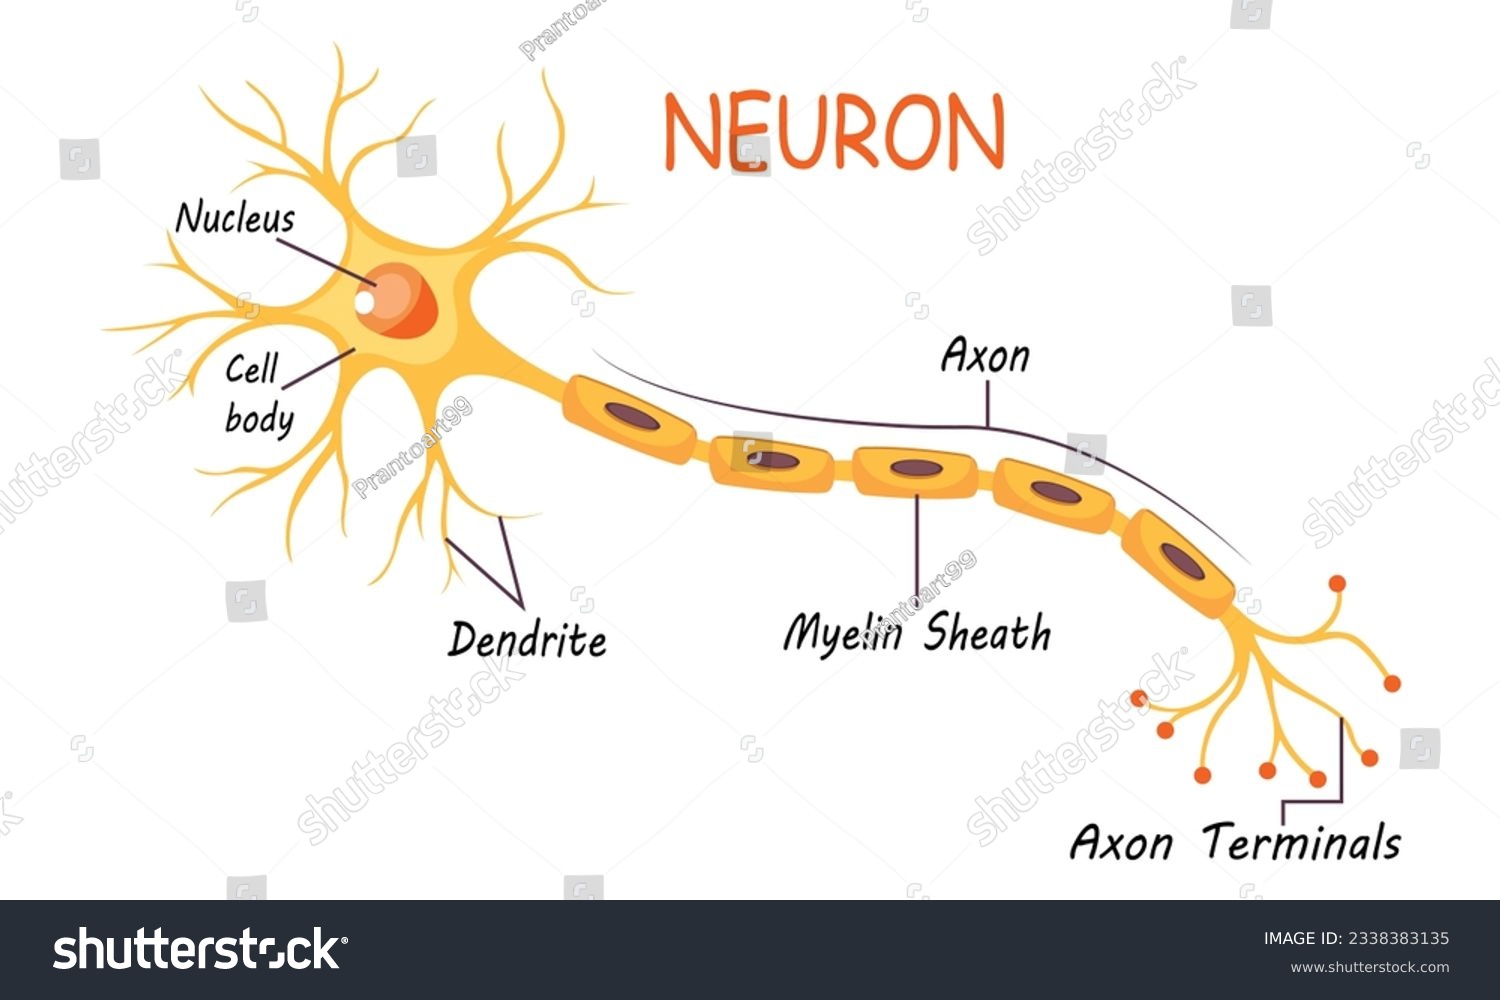 SVG of Neuron Anatomy of Human Cell Line Art Vector and Illustration Design. Neuron Anatomy And Human Cell Line Art Design and Creative Kids. svg